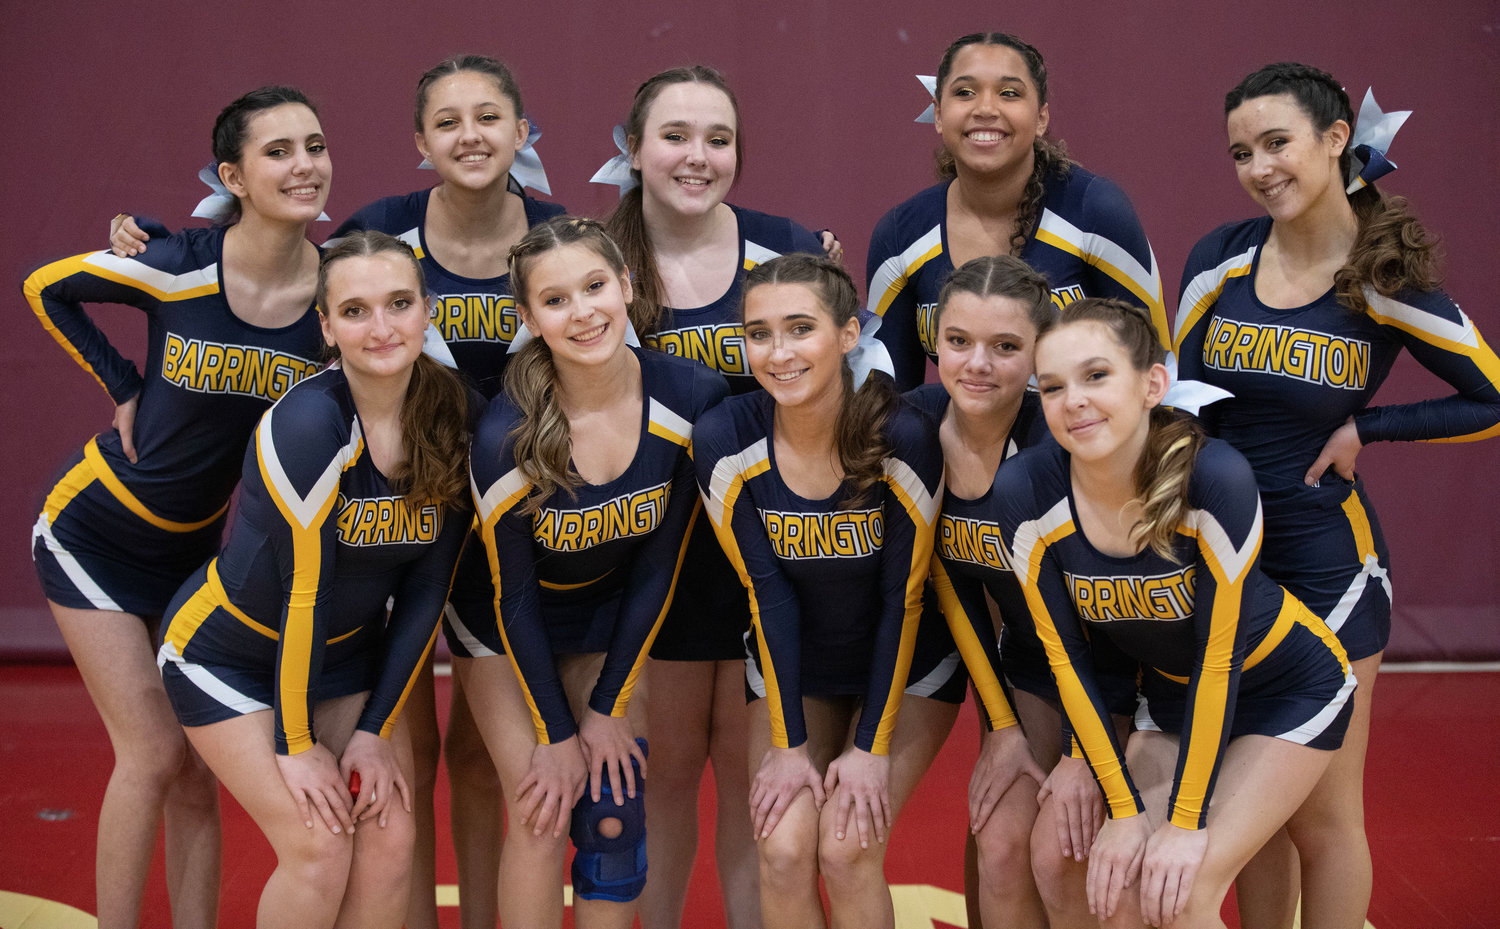 Members of the BHS cheer team pose for a group photo. Pictured are (from left to right, front row) Mia Casanova, Sarah Simon, Kaleigh Moran, Addison Corrow, and Morgane Seadale, and (back row) Isabella Alves, Ava-Bella Luis, Madison Oldham, Ava Maddox and Abby Guertler.